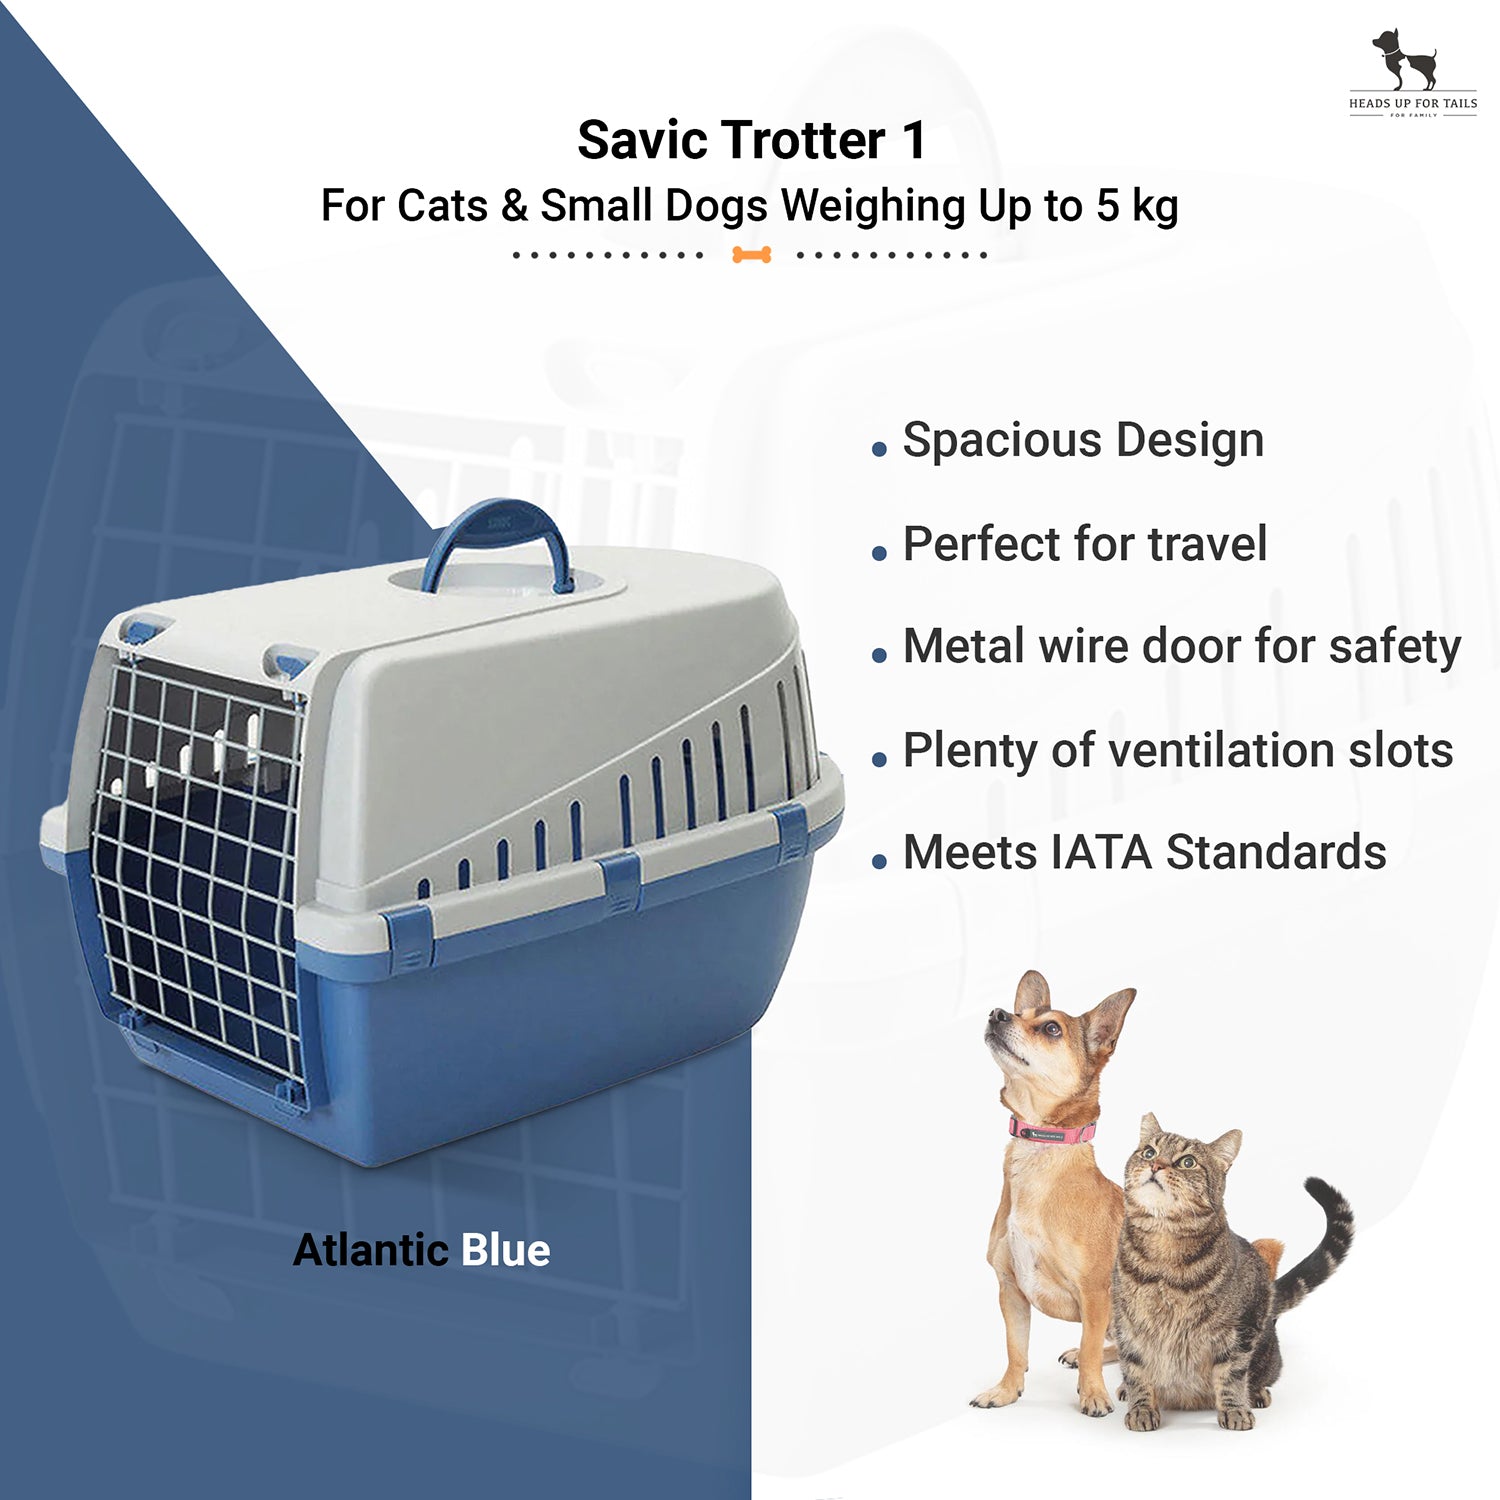 Savic Trotter 1 - Dog & Cat Carrier - Atlantic Blue - 19 x 13 x 12 inch - Holds up to 5 kg - Heads Up For Tails